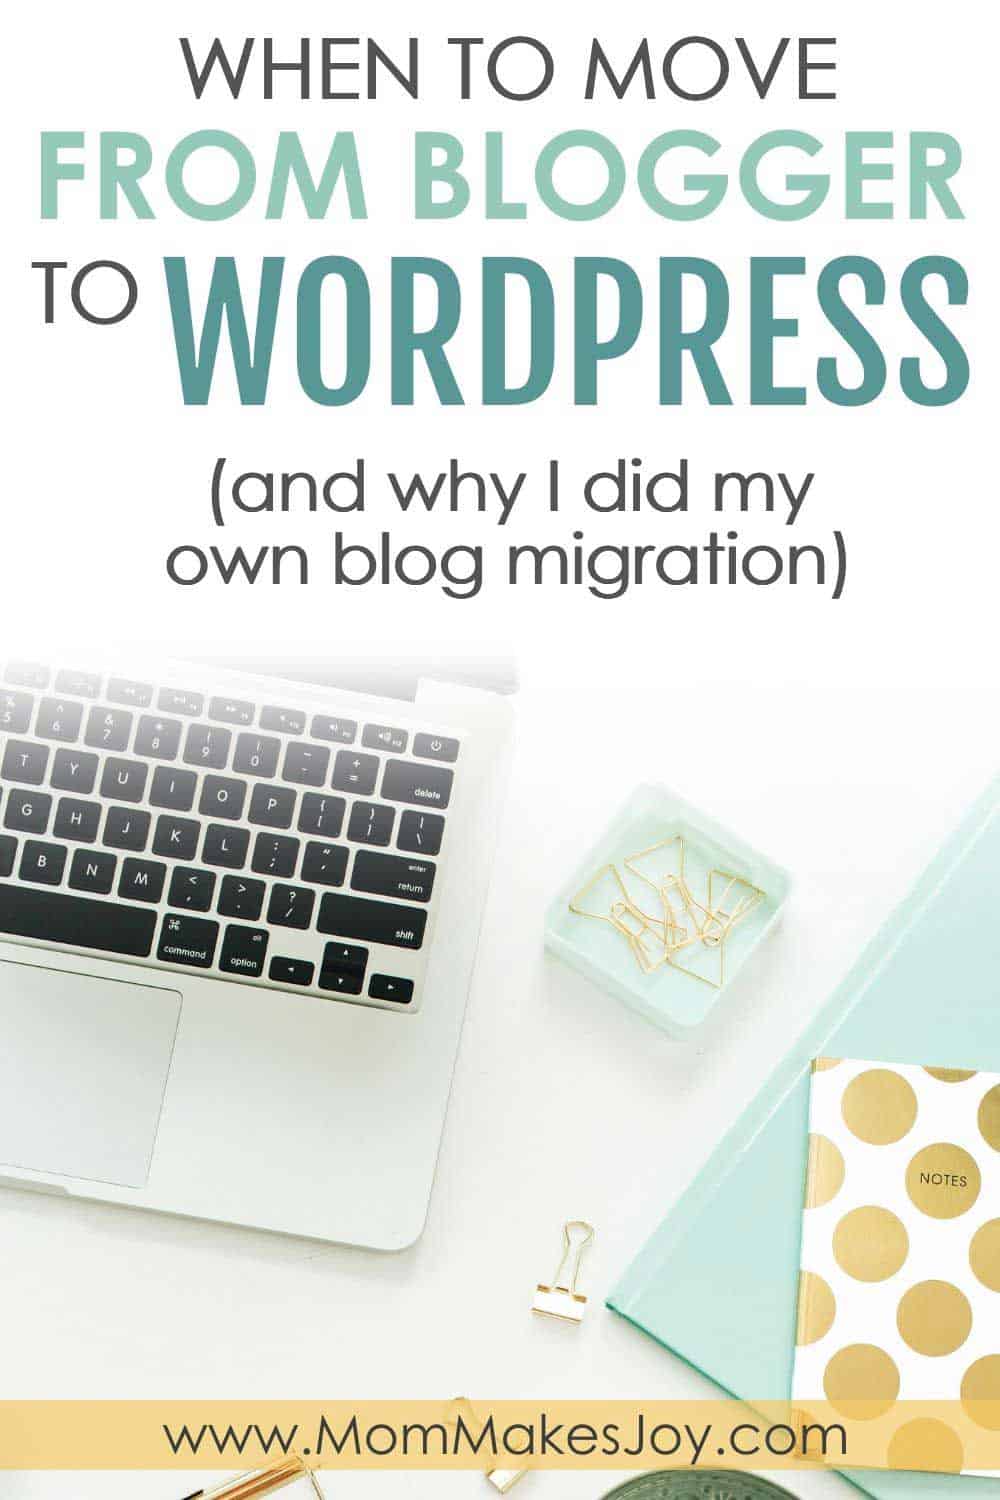 When to move from blogger to wordpress, and why I did my own blog migration